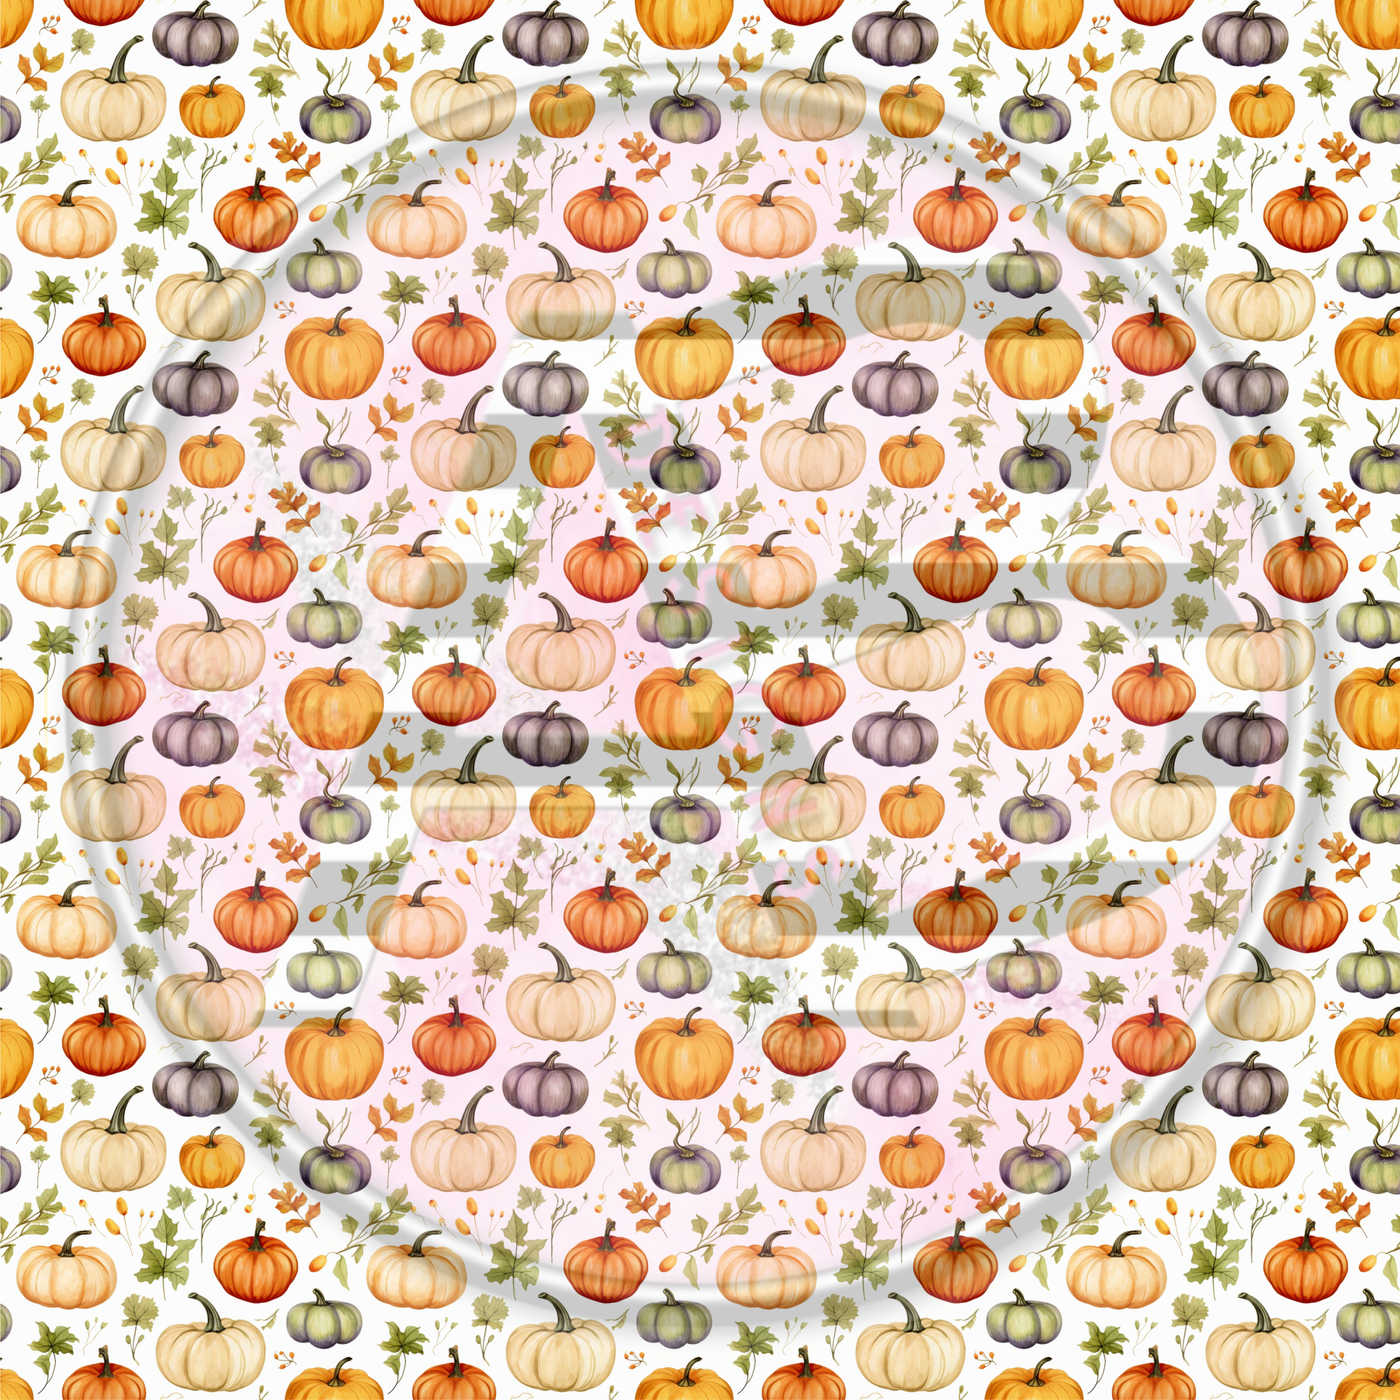 Adhesive Patterned Vinyl - Fall 11 Smaller